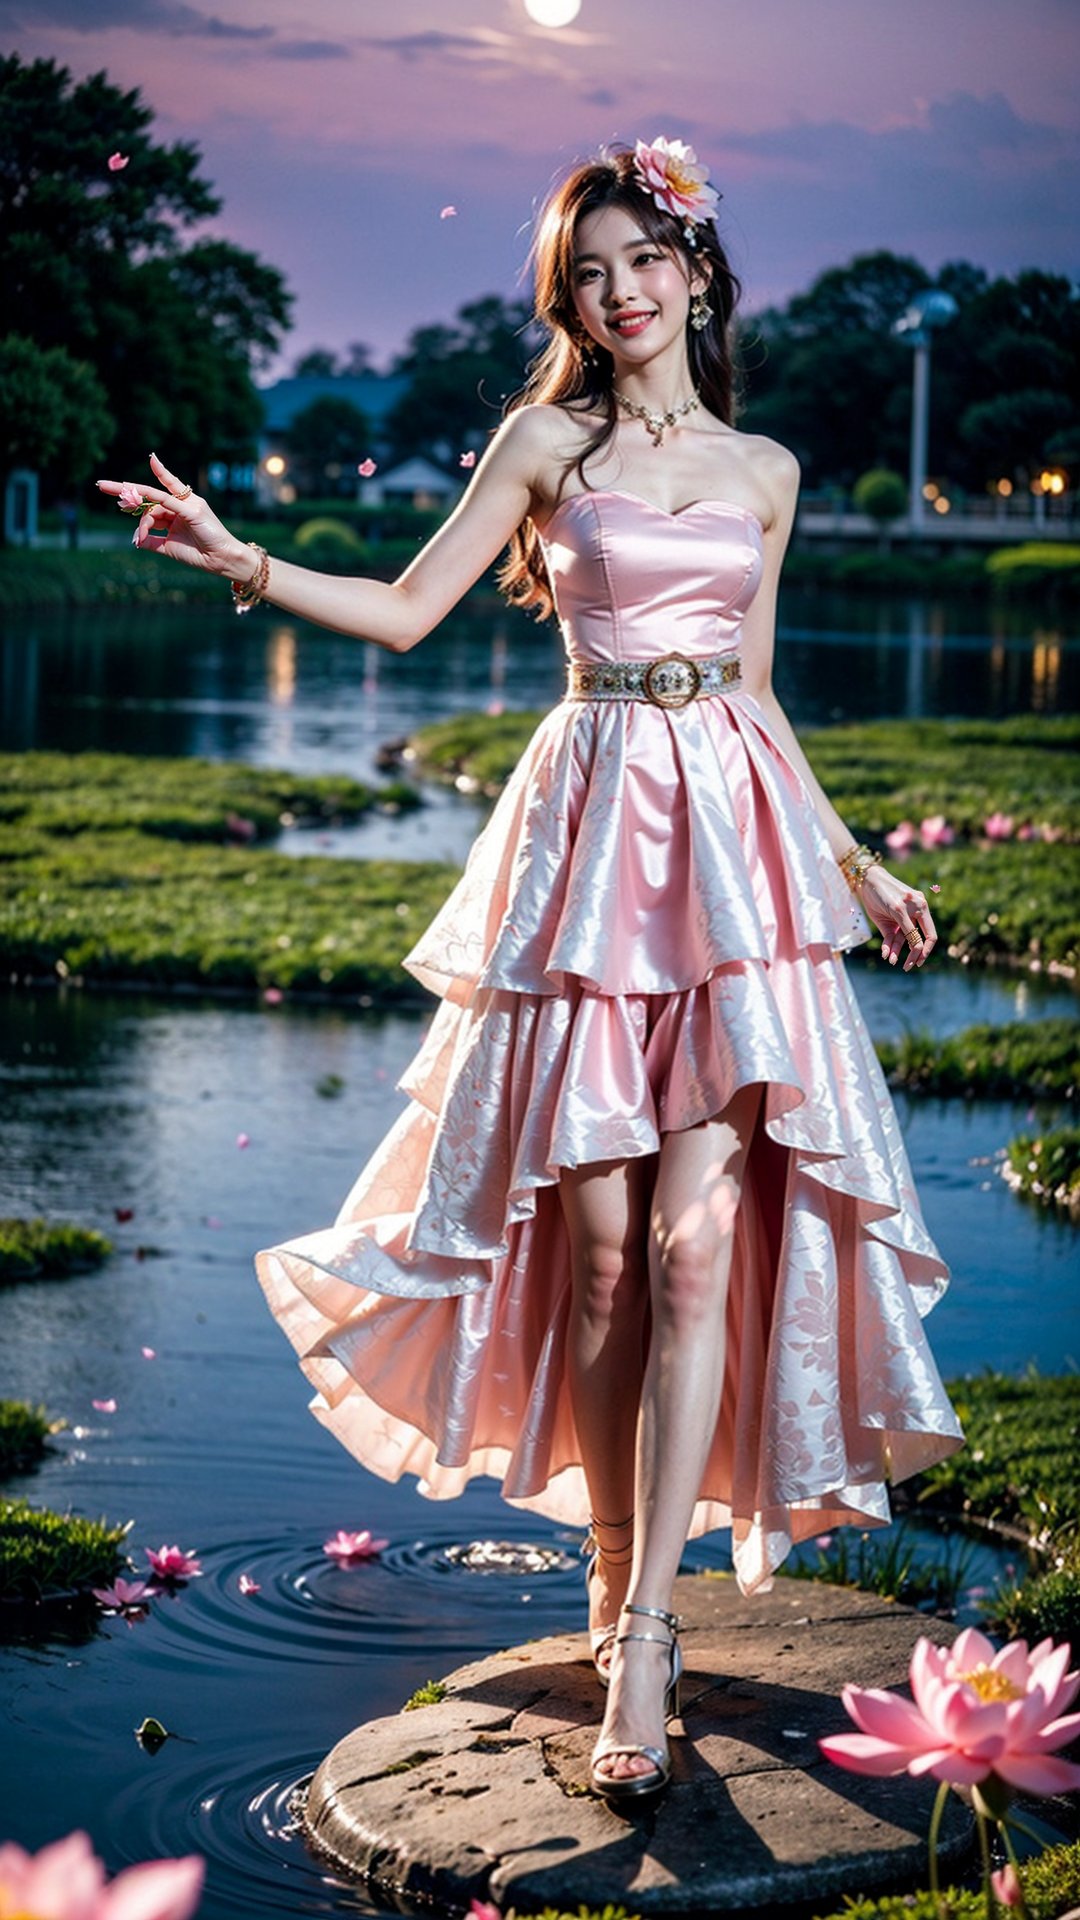 Beneath the ethereal glow of moonlight, a vision of elegance emerged by the lotus pond: Clad in a (short powder pink skirt:1.3) that hugged her figure, adorned with a delicate (waist belt:1.2) and (glistening jewelry:1.3), her (cascading hair:1.3) danced in the breeze. Layers of her skirt fluttered like (lotus petals:1.2) as her laughter echoed, creating a picturesque scene